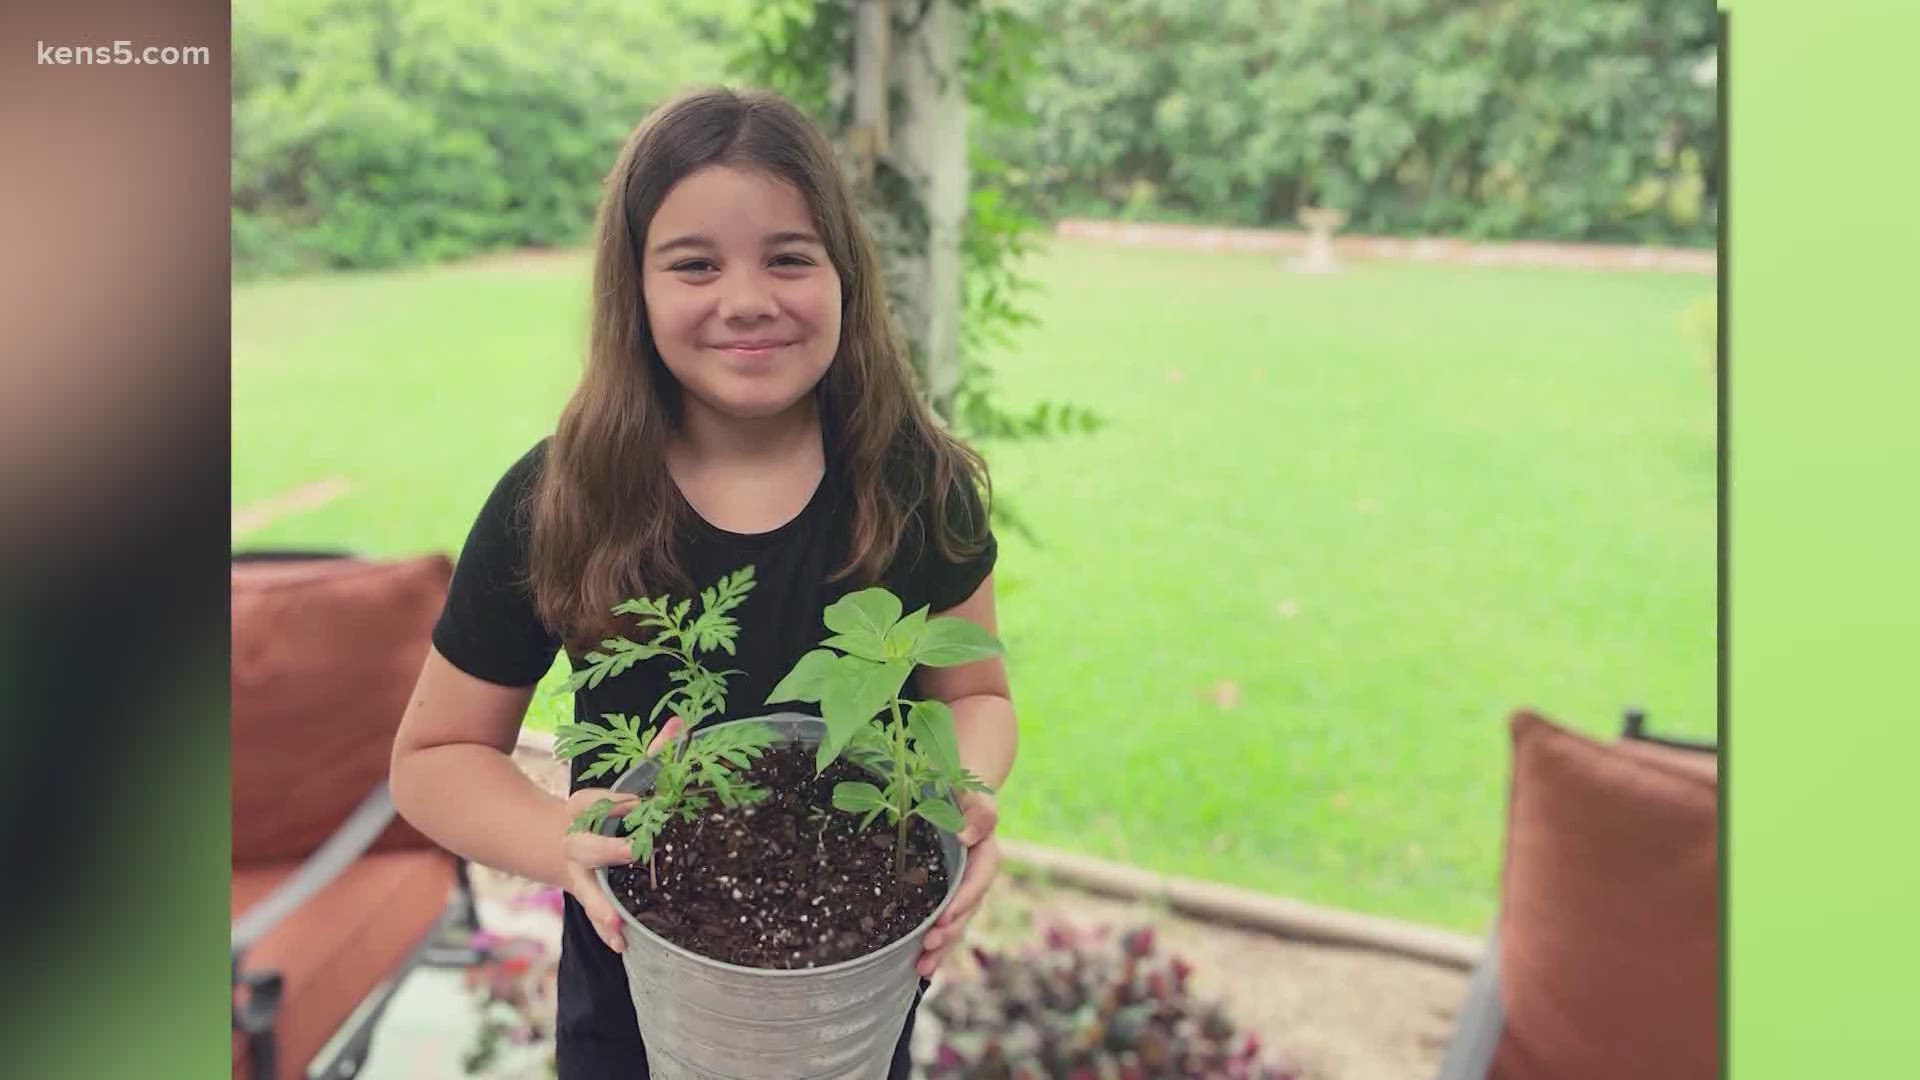 The 10-year-old Texan said she wanted to help the community in her own during uncertain times.